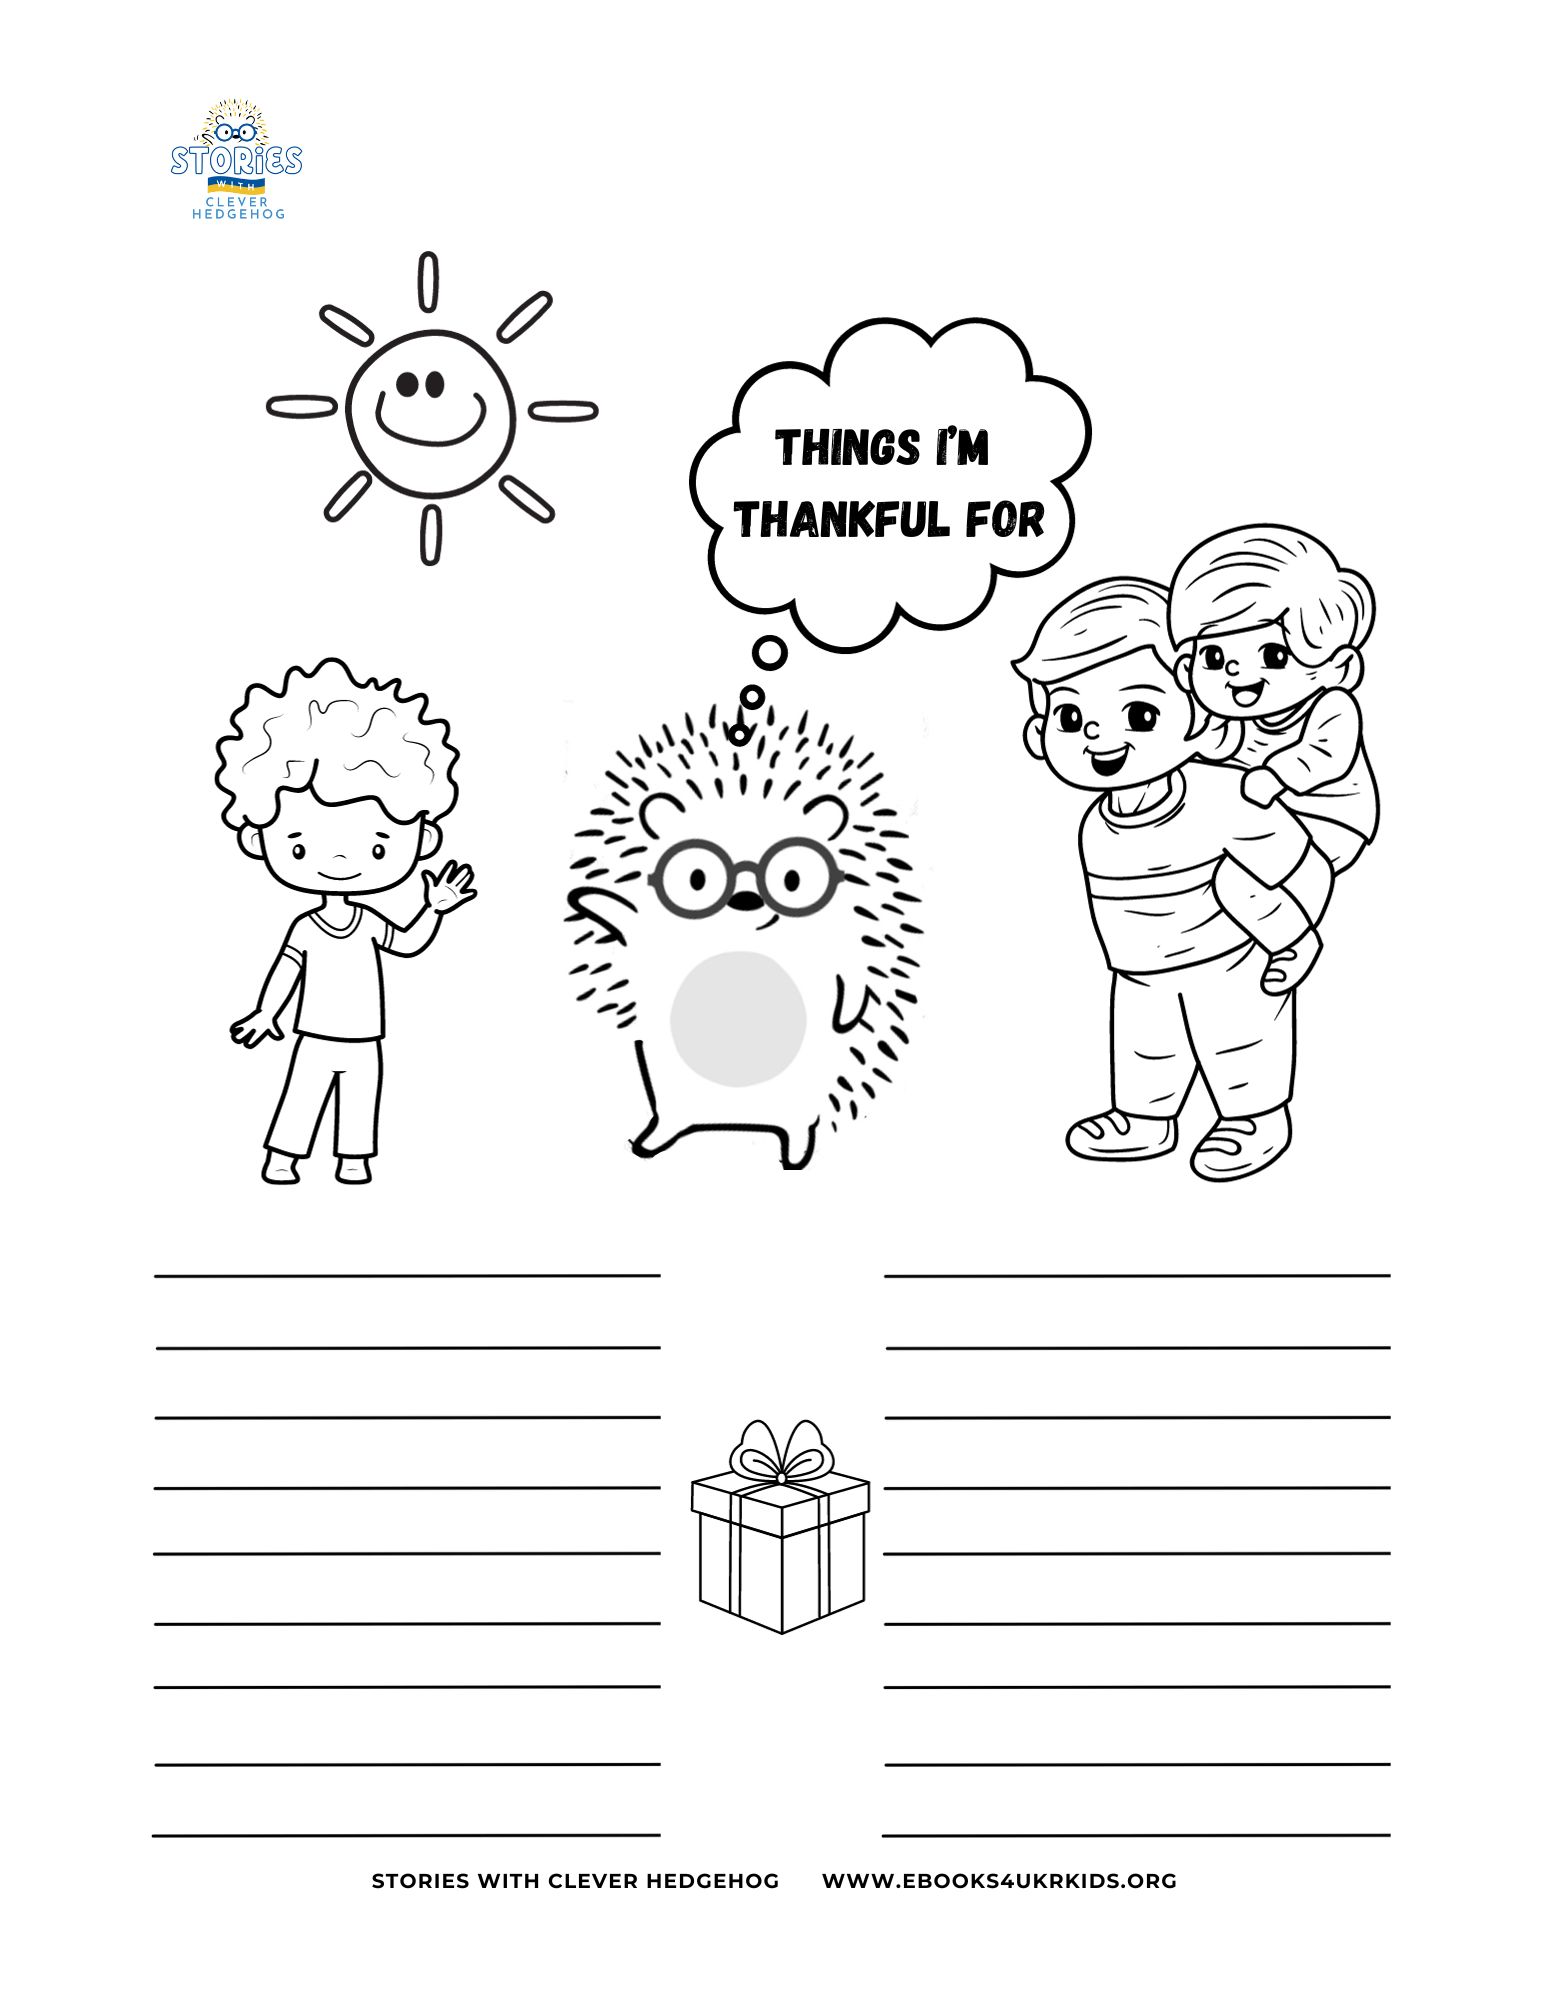 Things to be thankful for, Coloring page for kids, Stories with Clever Hedgehog